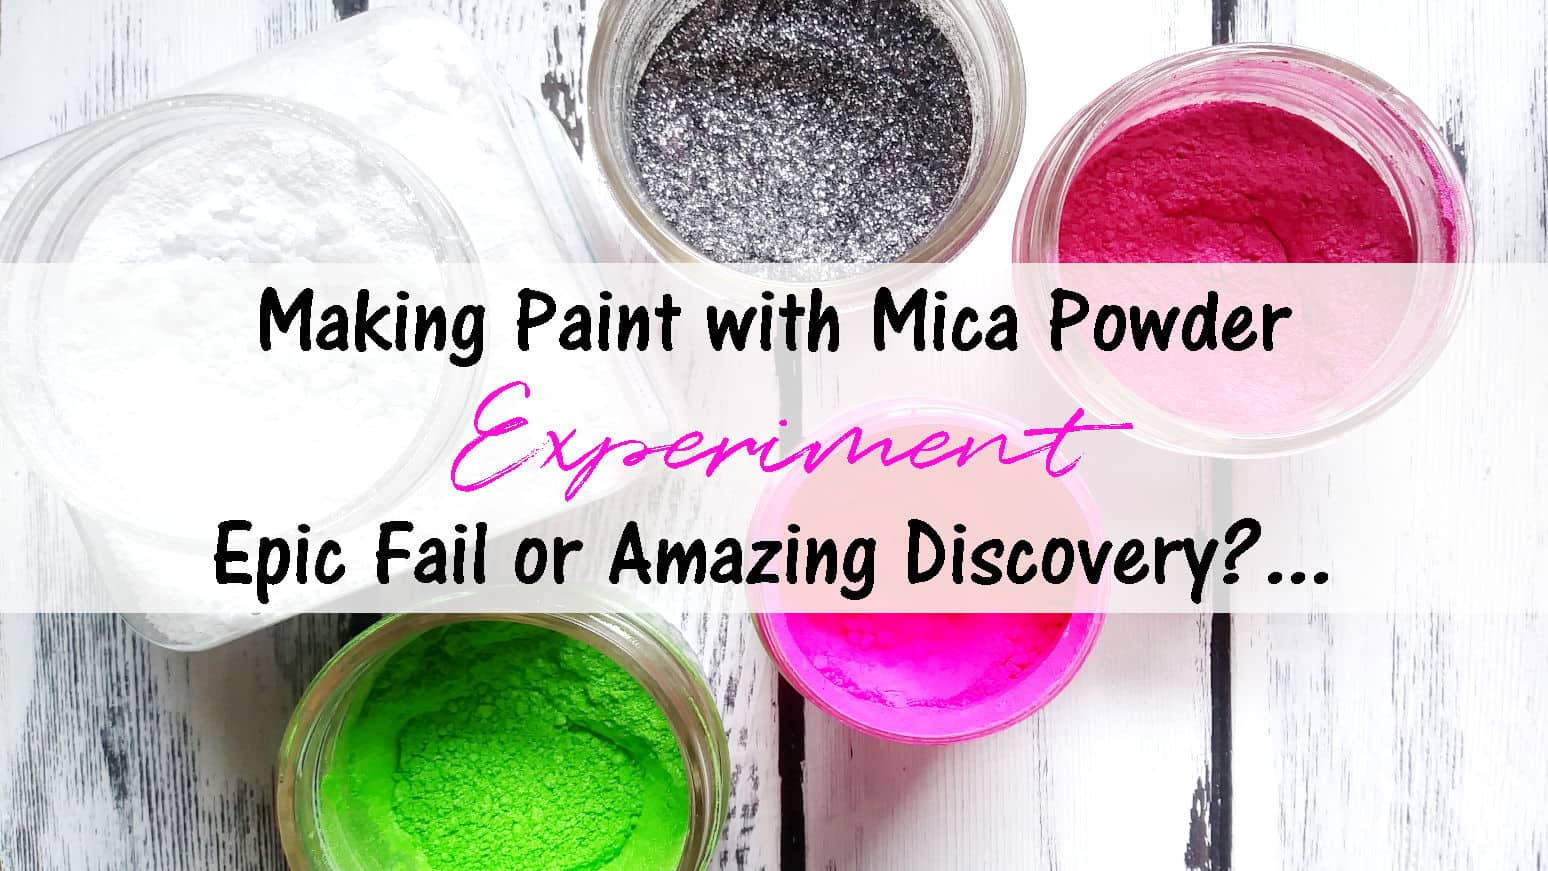 Showing the lime green, sparkle black and pink mica powders that I used when making acrylic paint. Also shown, is neon pink pigment and titanium dioxide white.